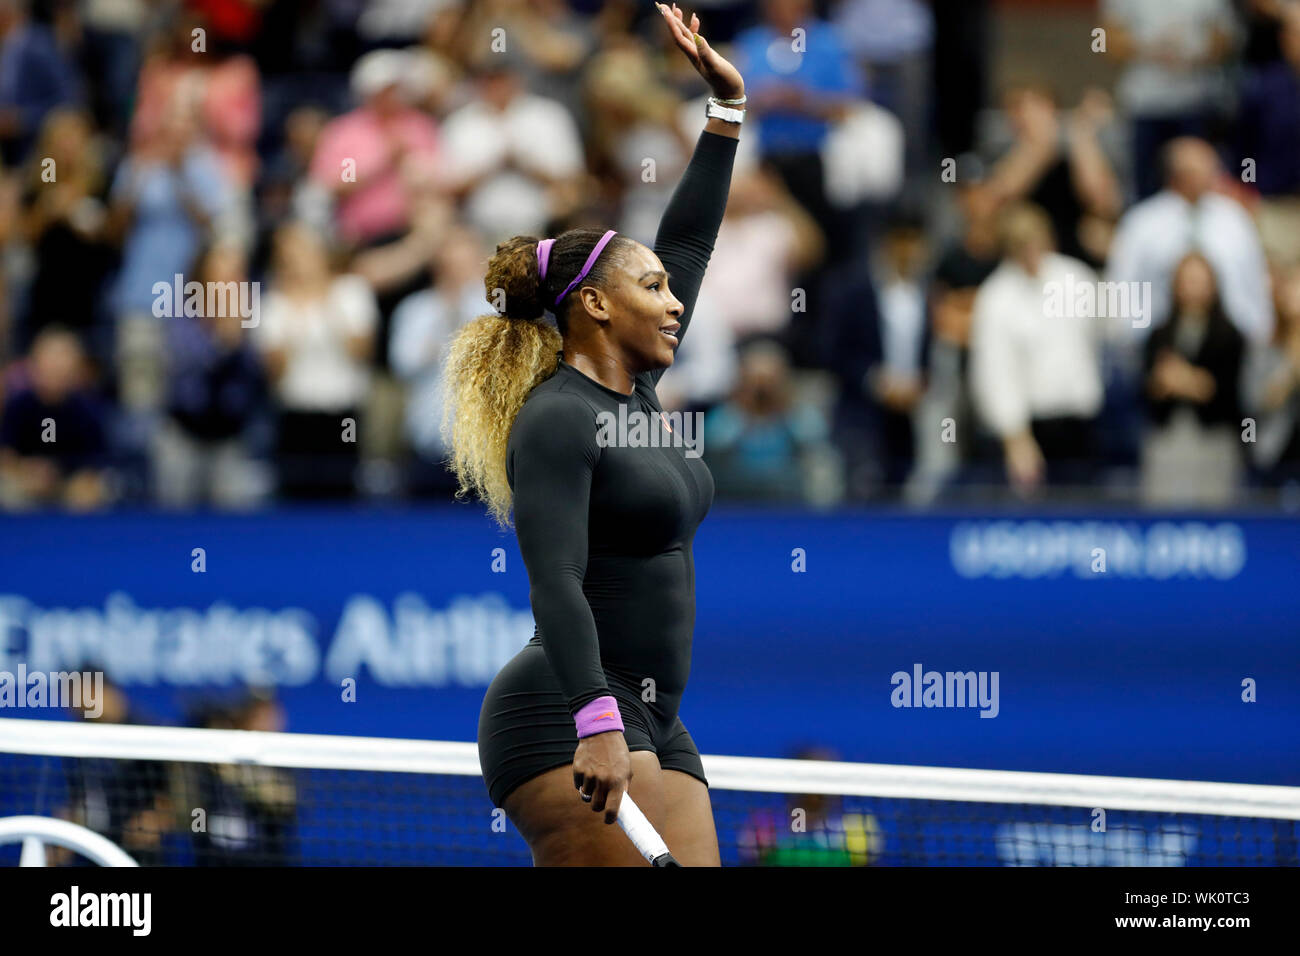 New York, USA. 3rd Sep, 2019. Serena Williams gestures to audience after women's singles quarterfinal match between Wang Qiang of China and Serena Williams of the United States at the 2019 US Open in New York, the United States, Sept. 3, 2019. Credit: Li Muzi/Xinhua/Alamy Live News Stock Photo